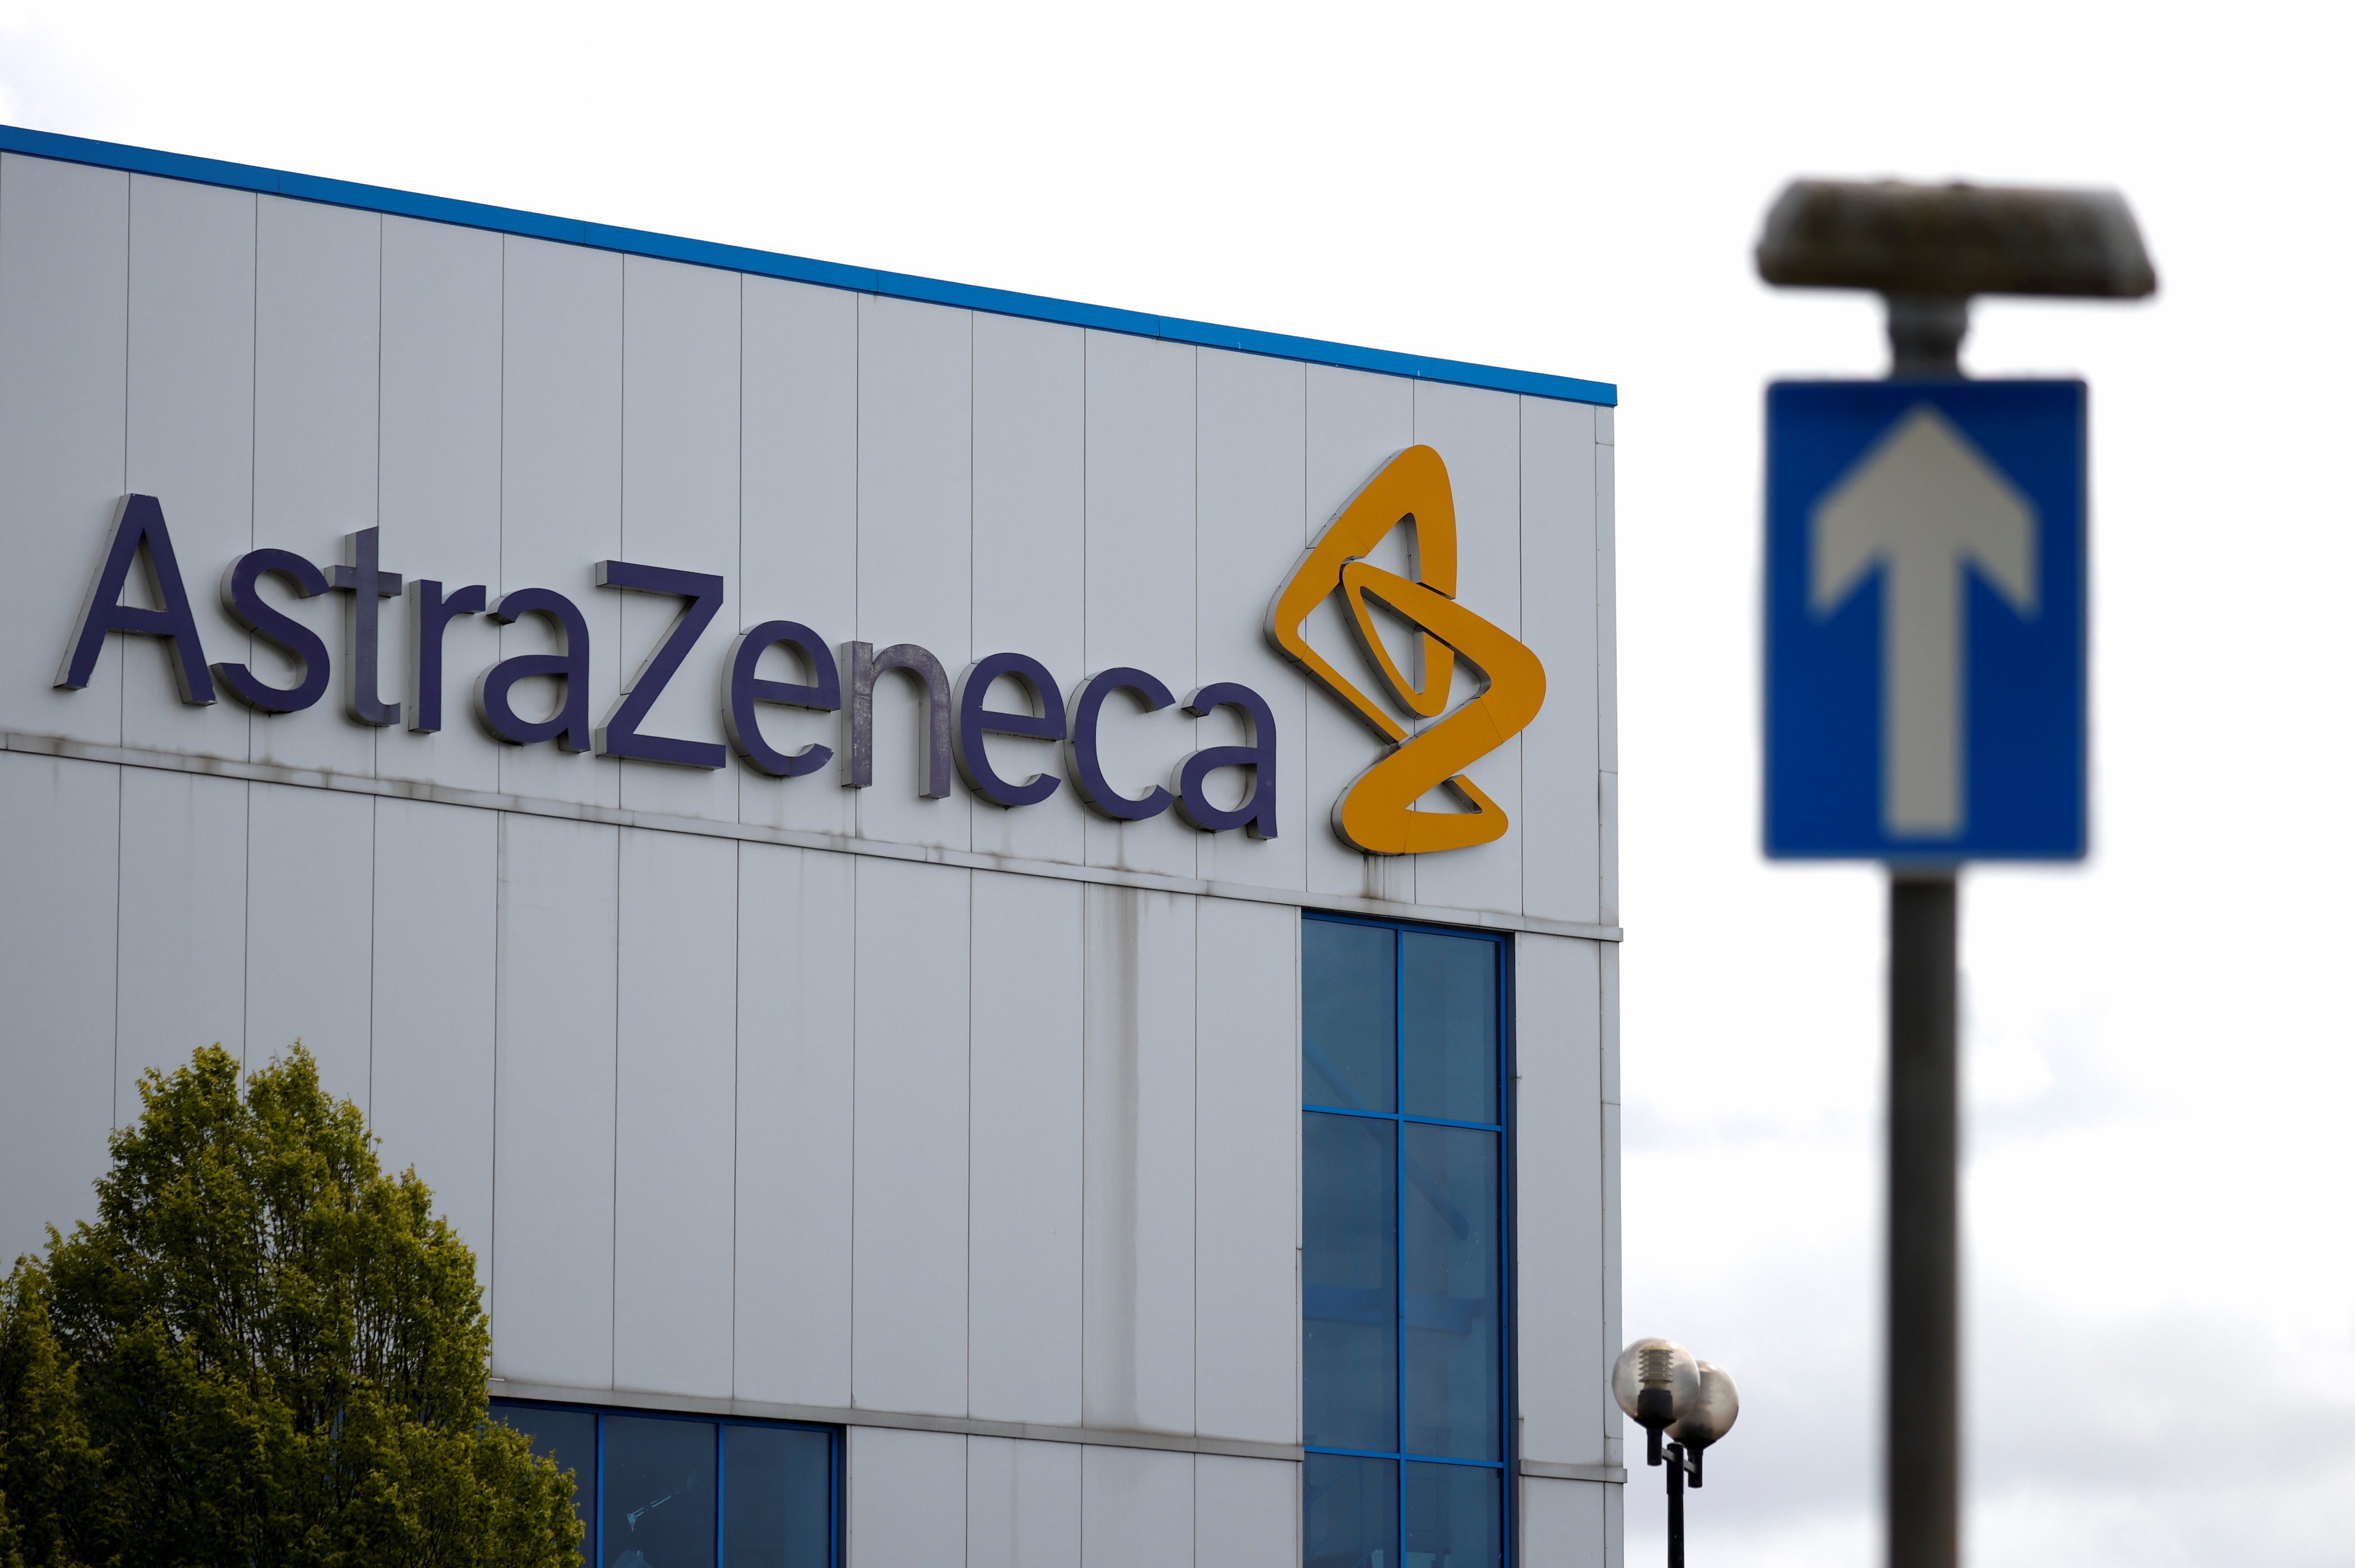 AstraZeneca says working with Southeast Asian nations on vaccine deliveries